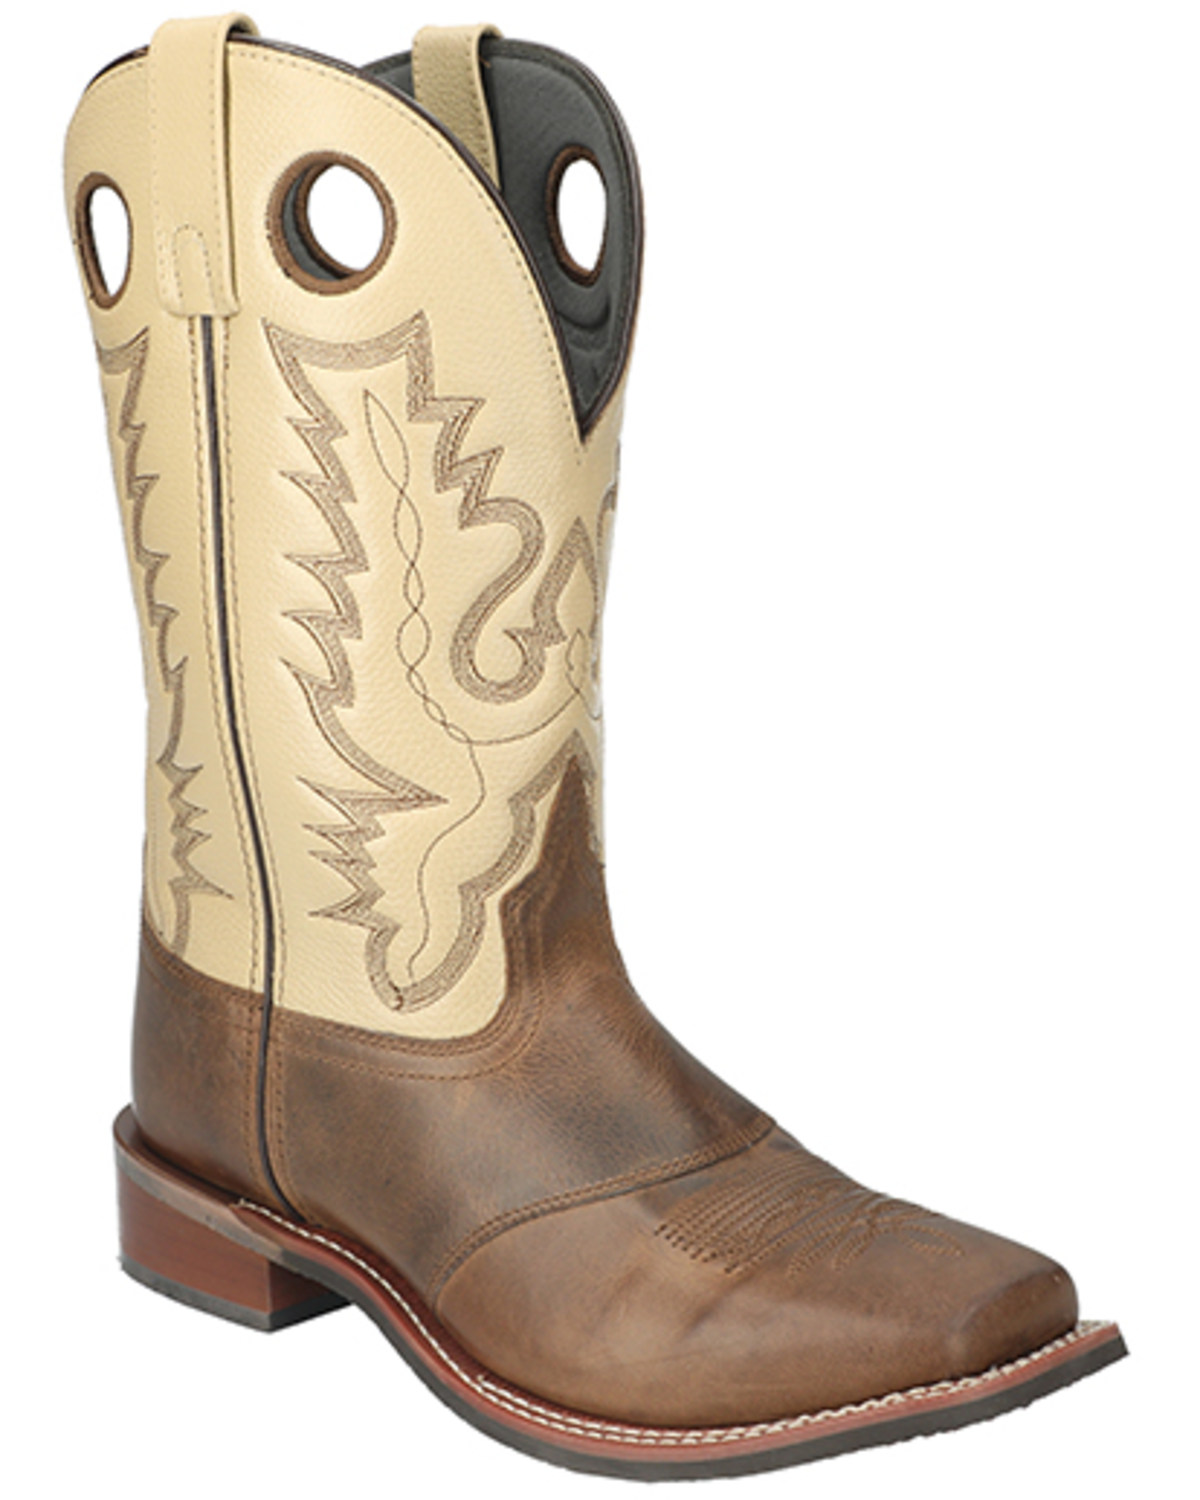 Smoky Mountain Men's Nash Performance Western Boots - Broad Square Toe